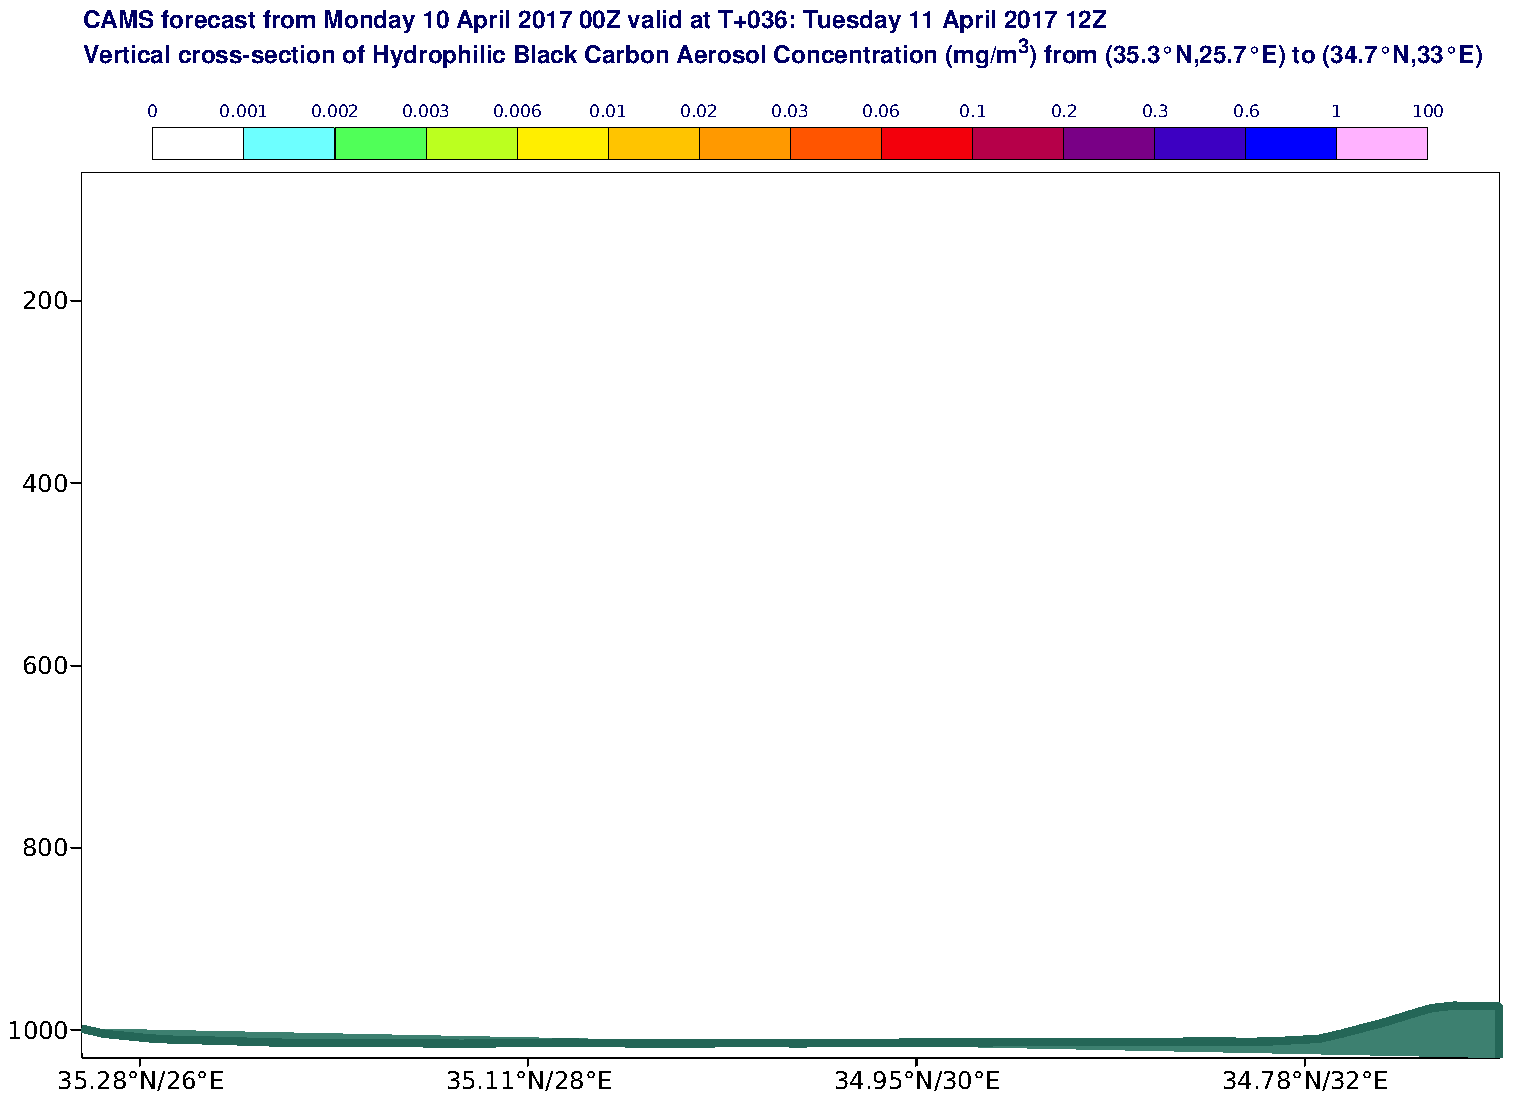 Vertical cross-section of Hydrophilic Black Carbon Aerosol Concentration (mg/m3) valid at T36 - 2017-04-11 12:00